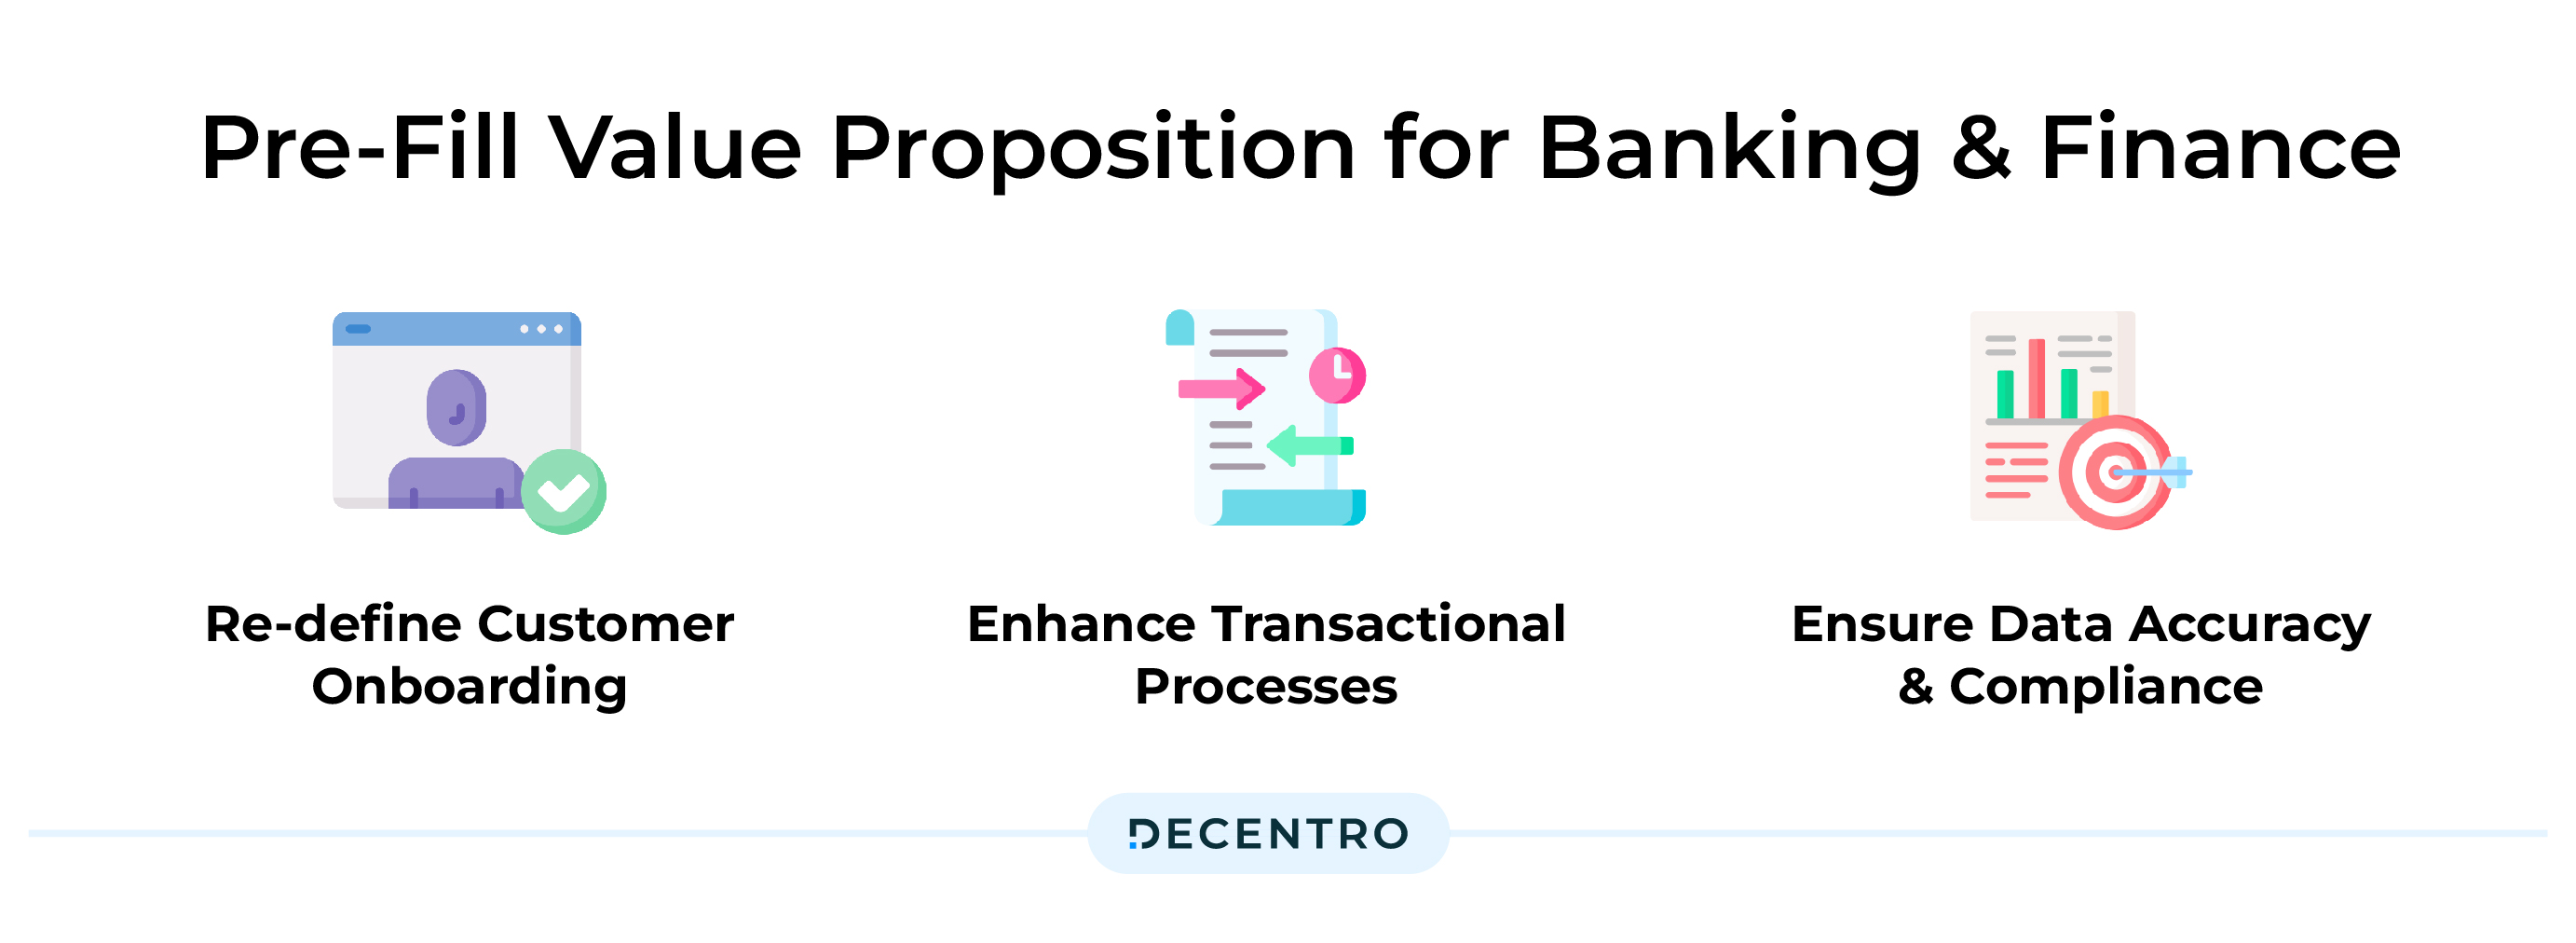 Value proposition of having pre-fill deployed for banking and finance industry